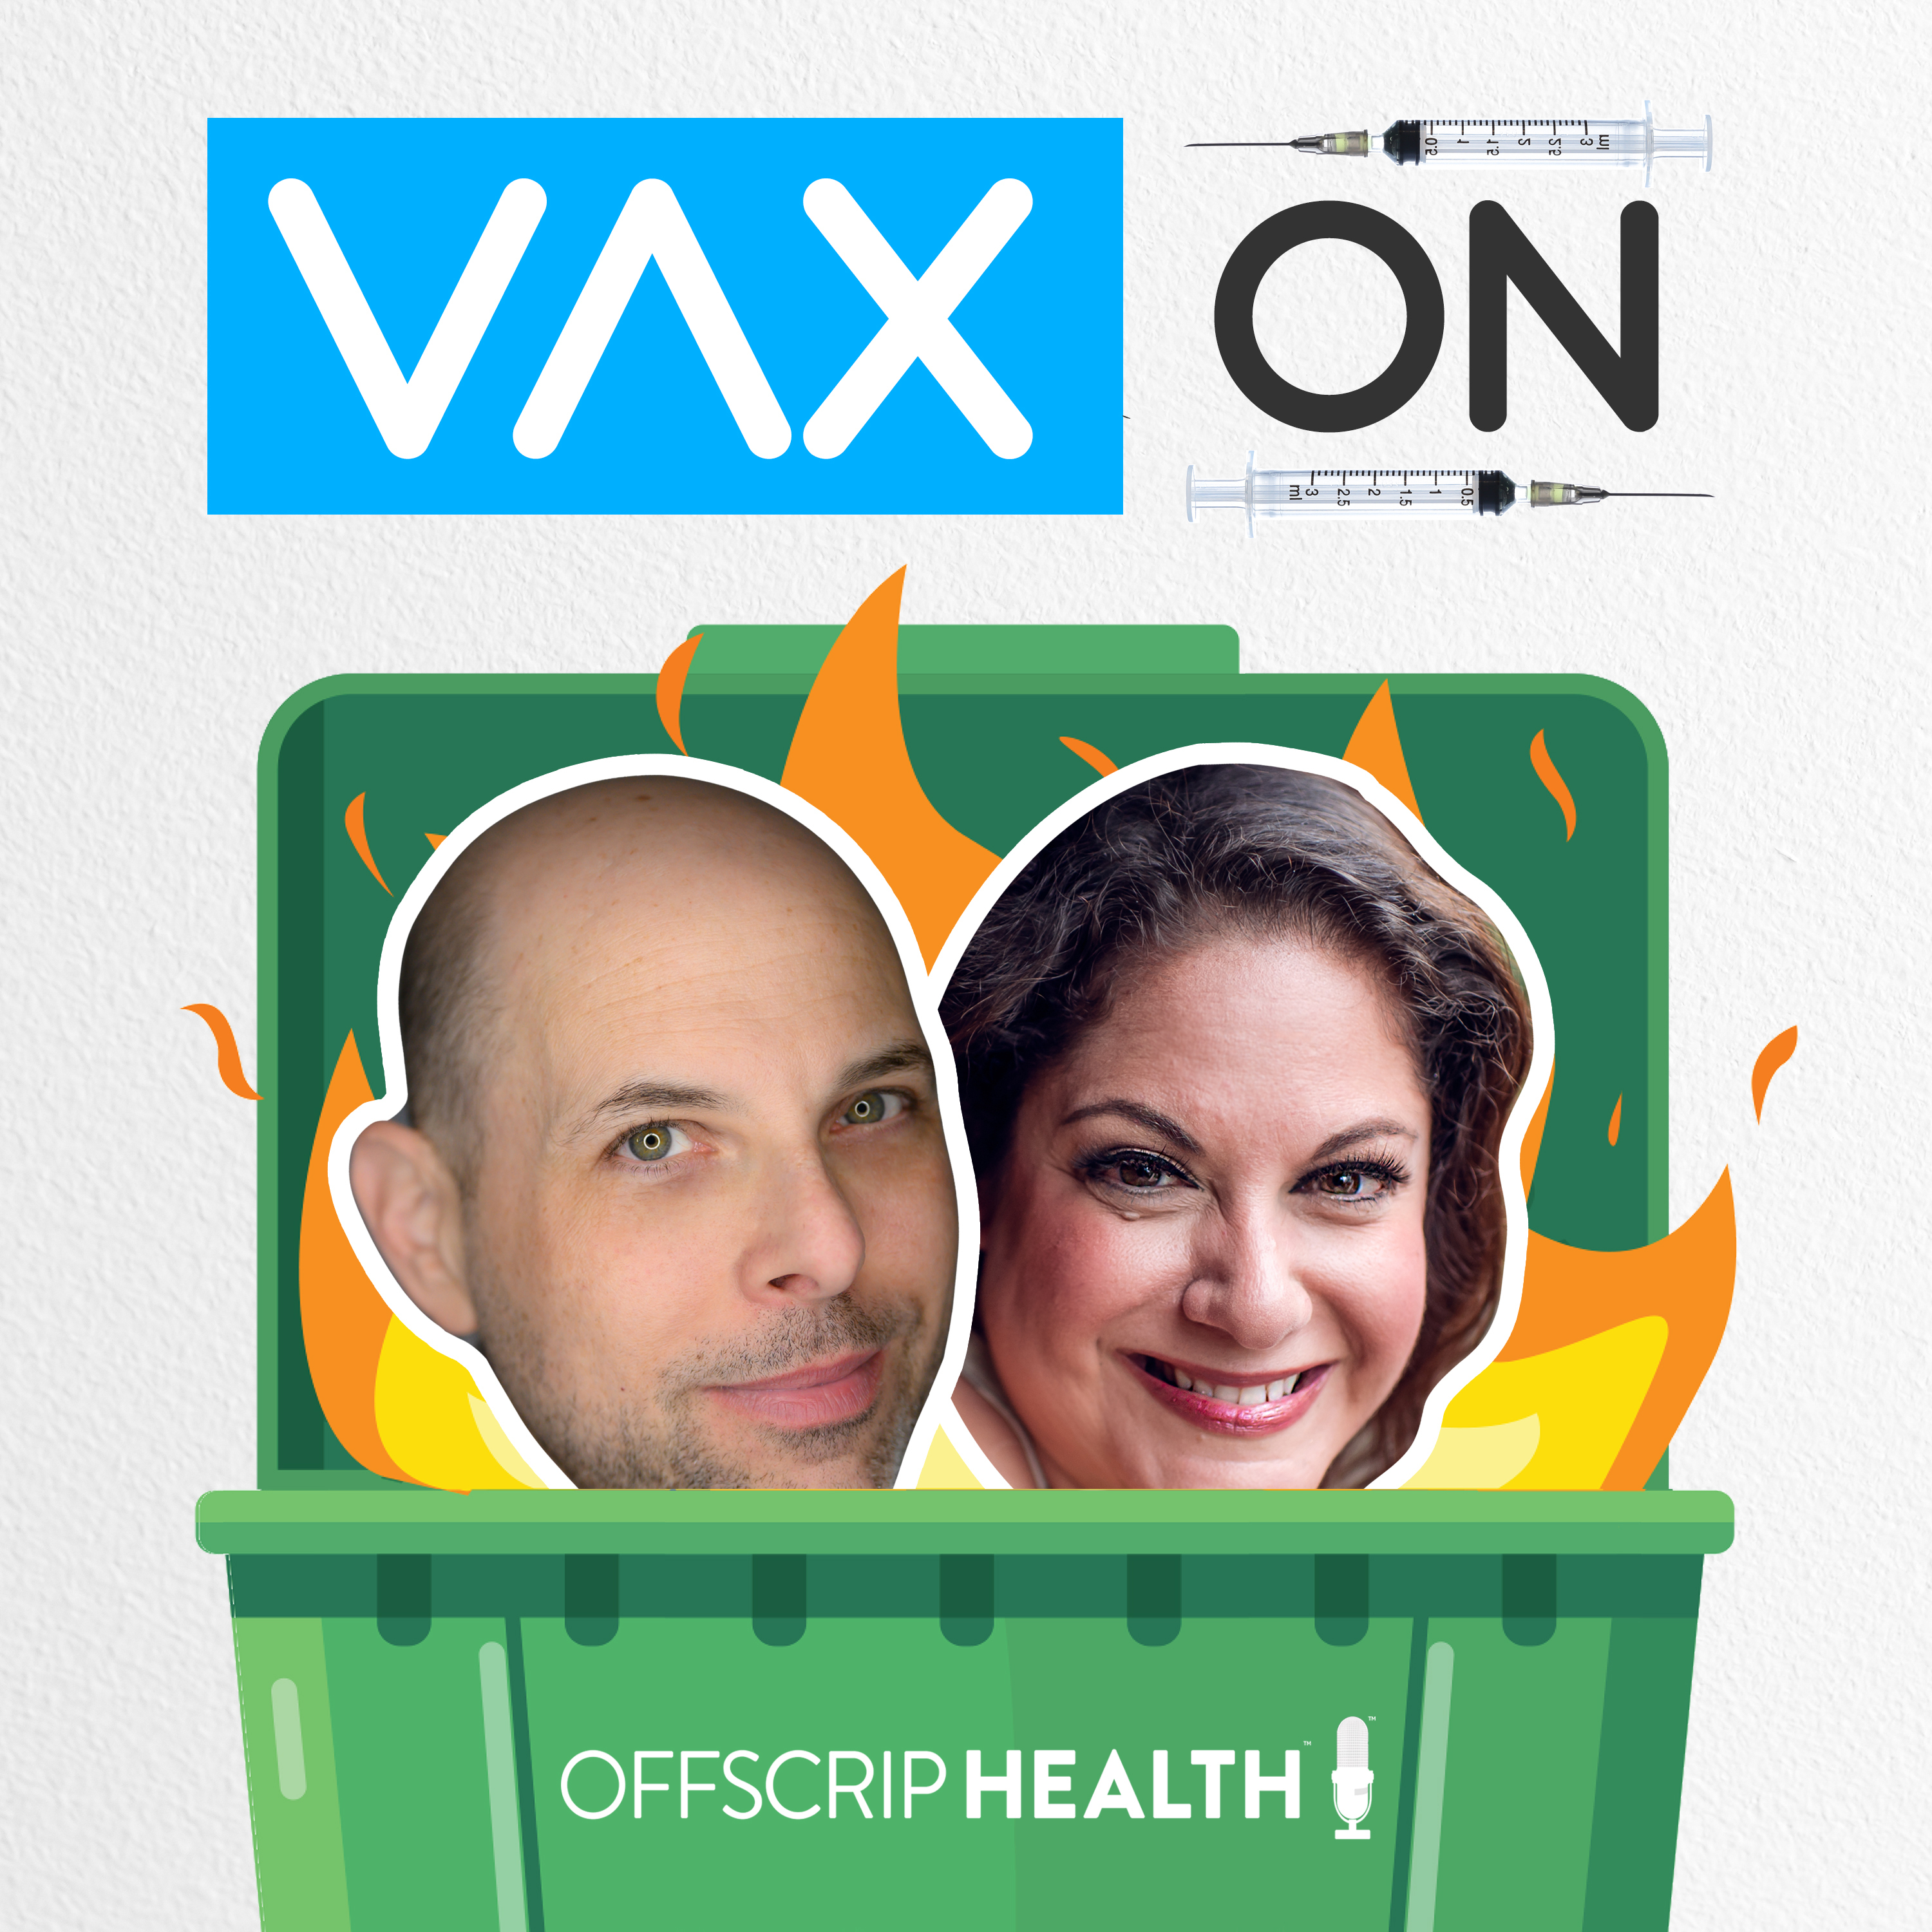 Vax On: Faucc on a Couch, College vs. COVID, and Bill Gates' Pandemic Predictions